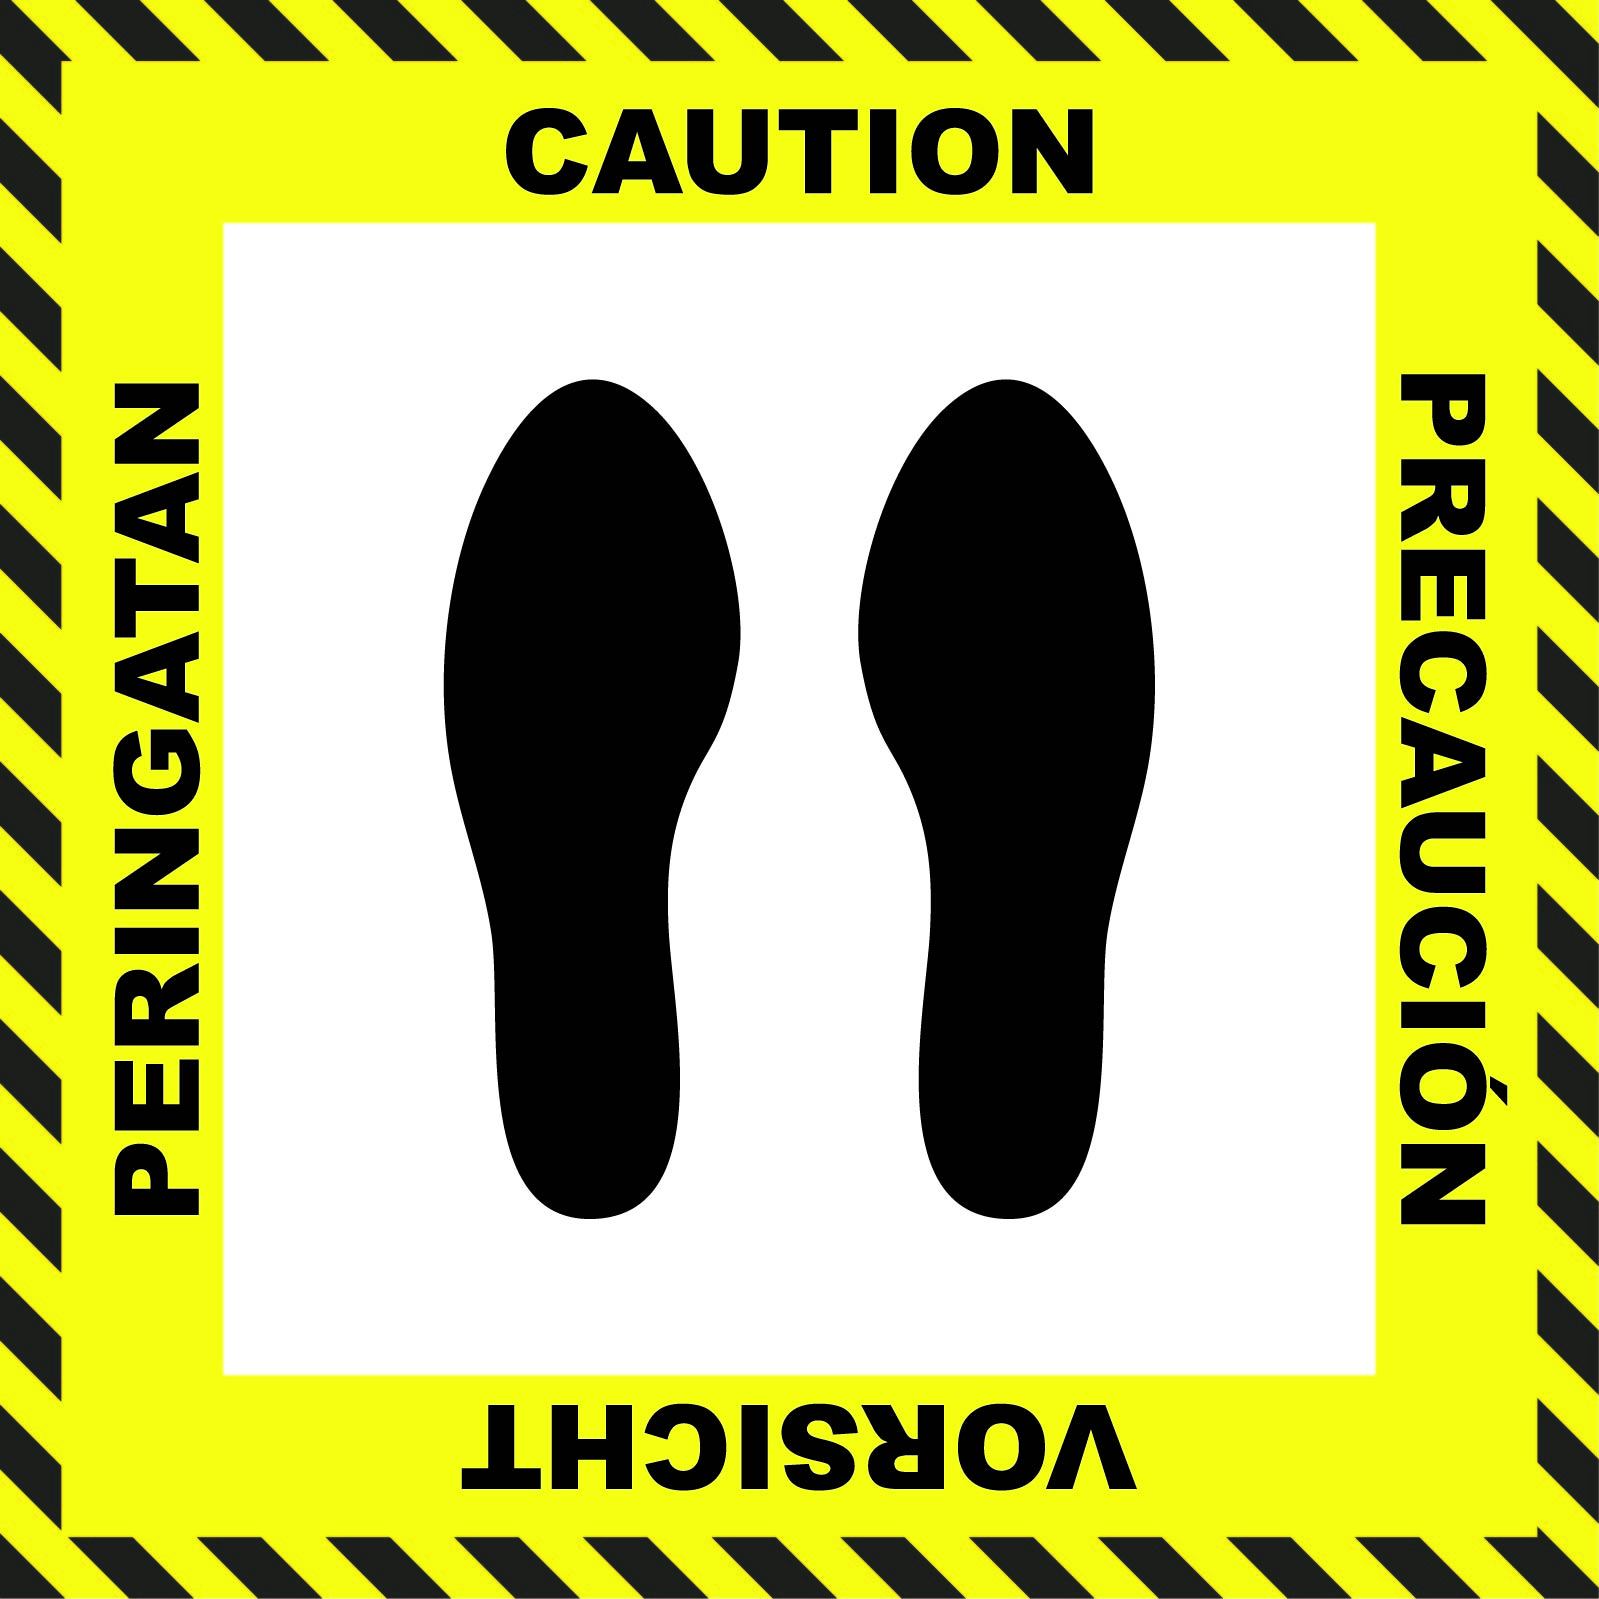 "Caution" Stand Here Multilingual Social Distancing Floor Sign - 22"